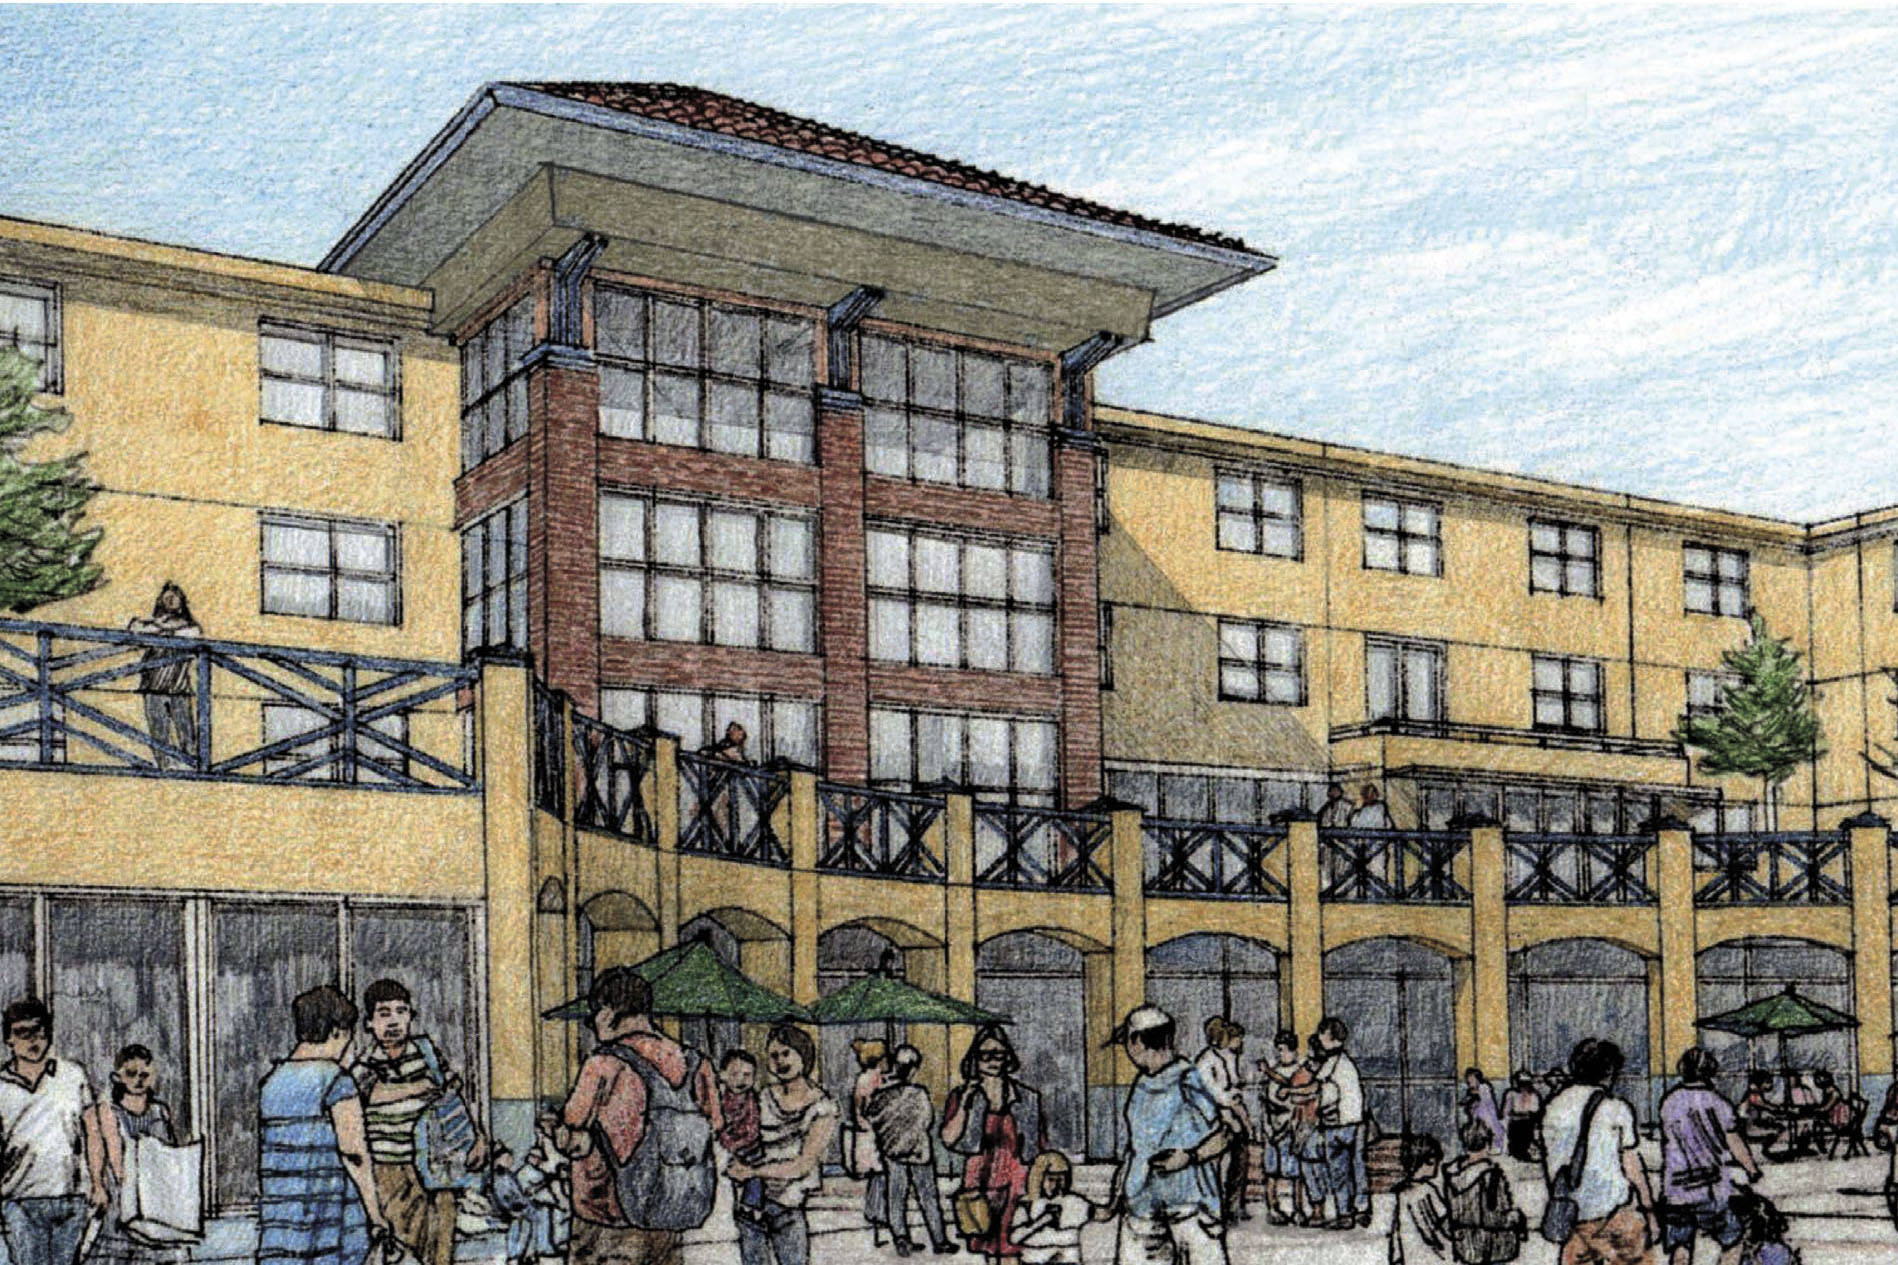 Groundbreaking for the Filipino Community Village project is slated to begin in 2019. The four-story building will include 94 affordable housing units designed for low-income seniors. The project started nearly a decade ago and has involved the purchase of seven parcels of land near the community center in Southeast Seattle. Rendering courtesy of the Filipino Community of Seattle